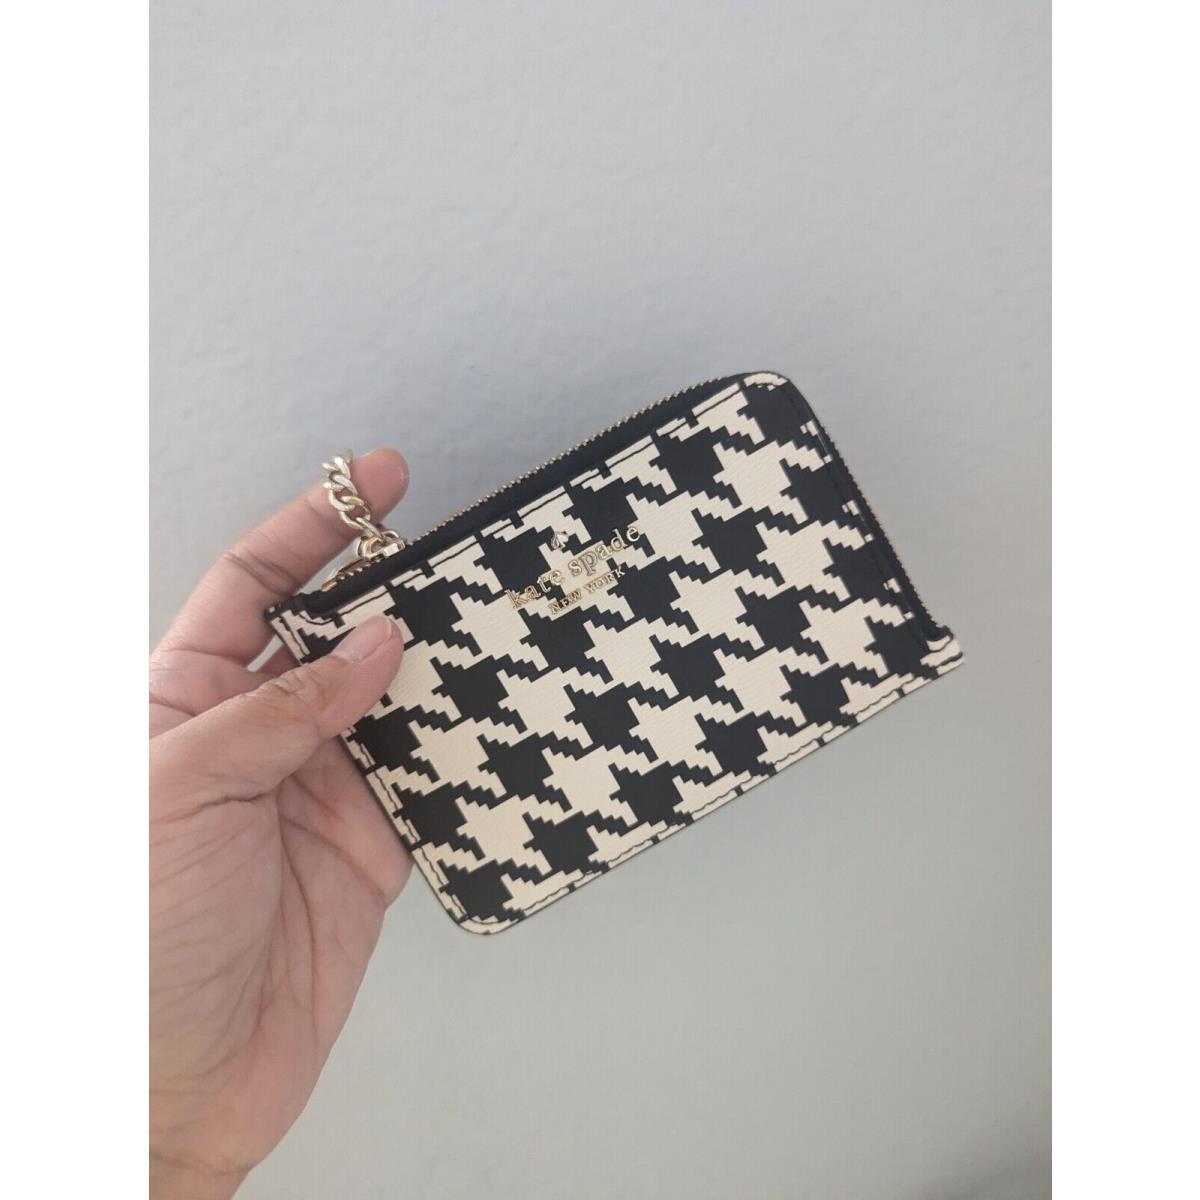 Kate spade Darcy houndstooth card case wallet